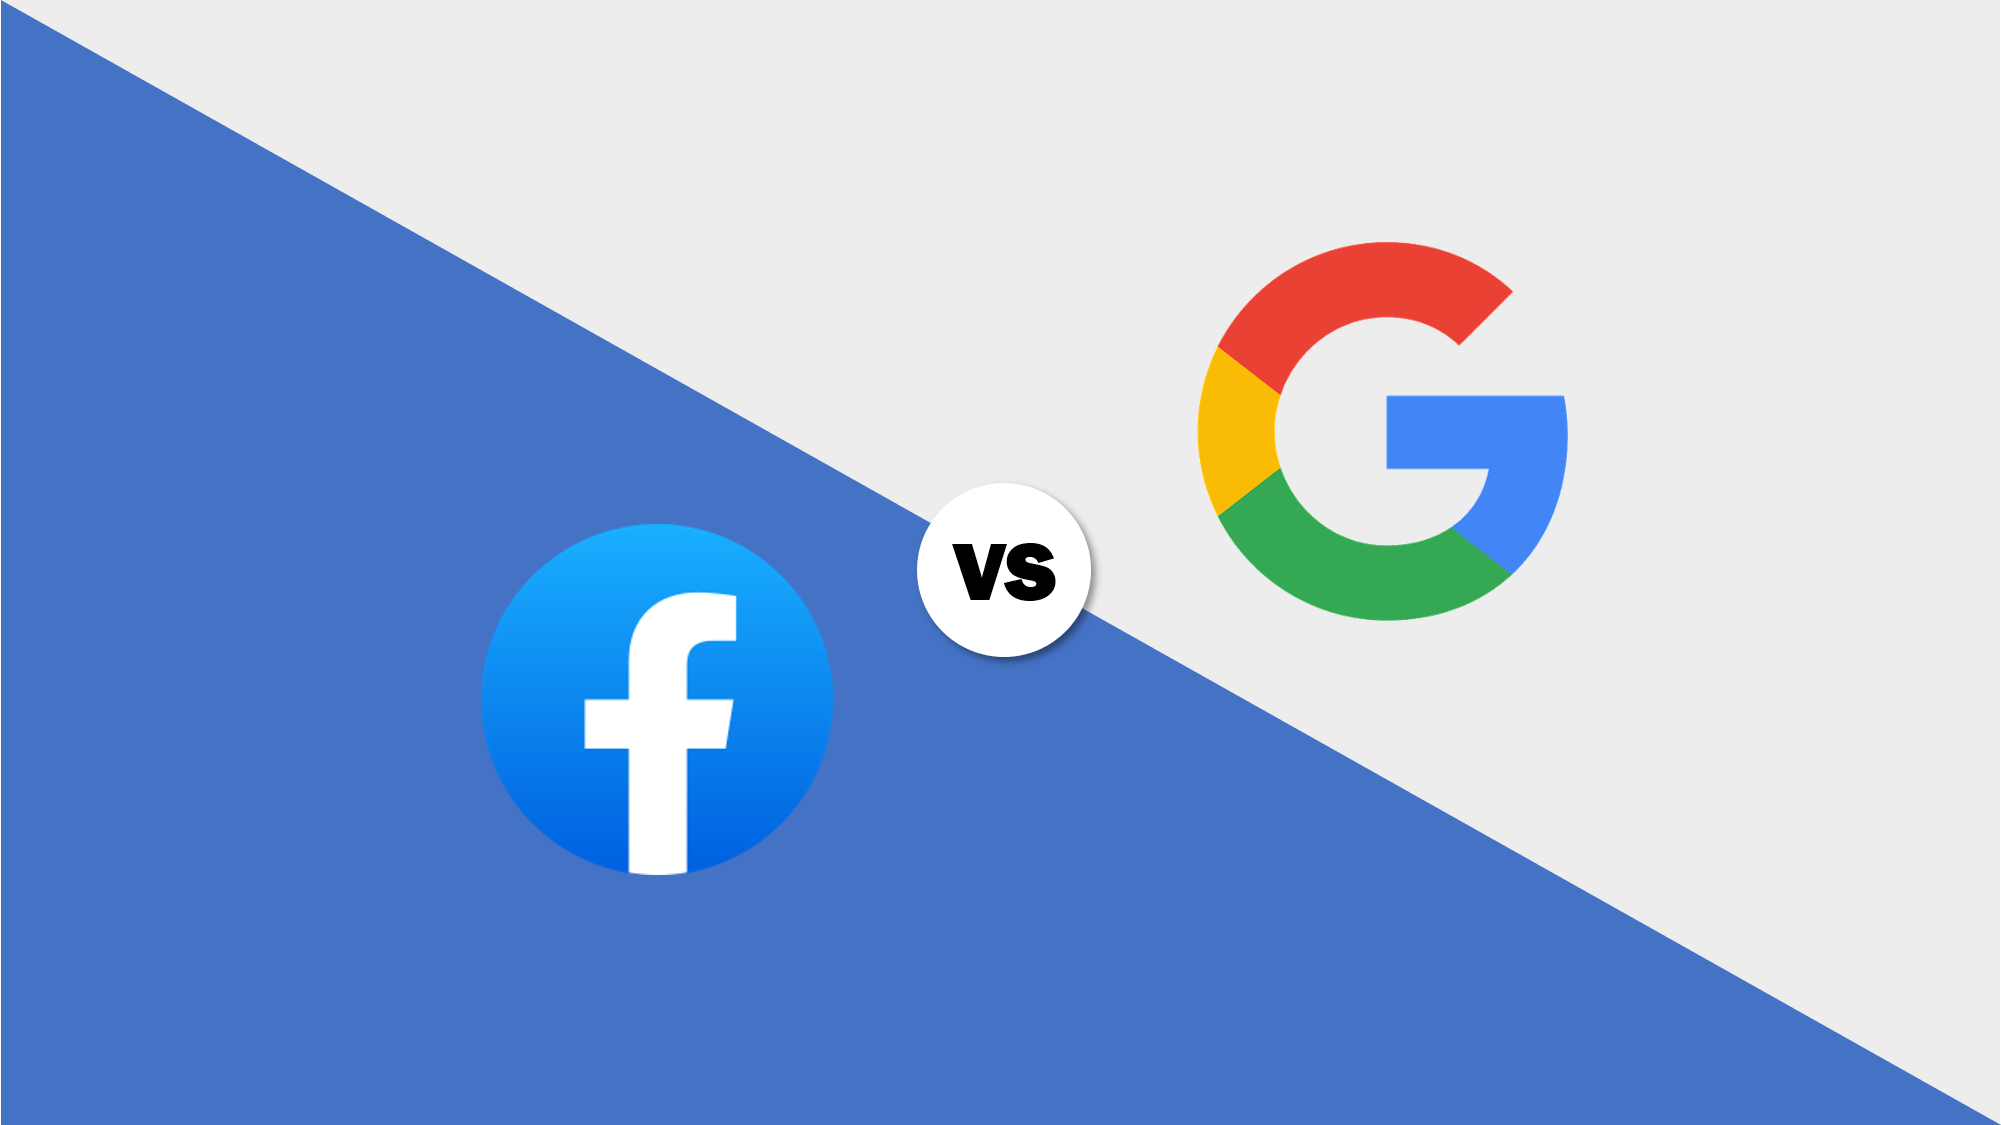 Facebook Ads vs Google Ads: Which is Better For My Small Business